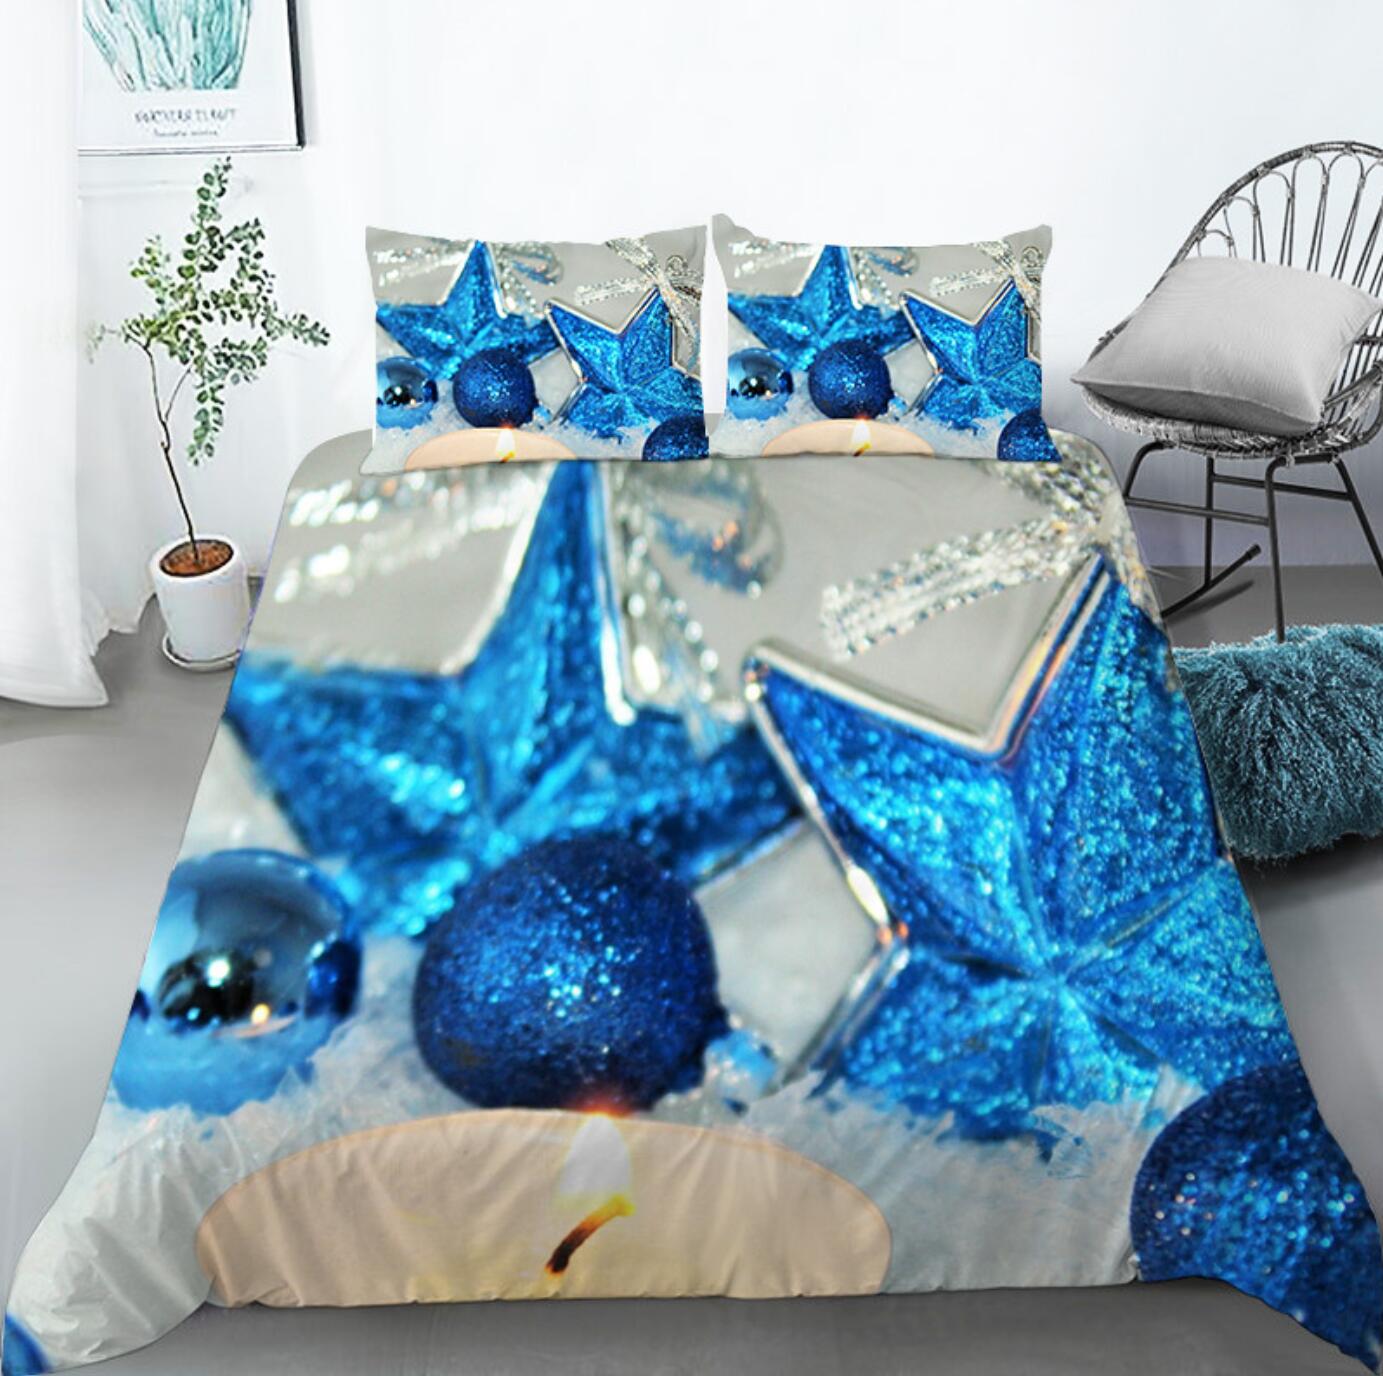 3D Blue Ball Five-Pointed Star 32110 Christmas Quilt Duvet Cover Xmas Bed Pillowcases